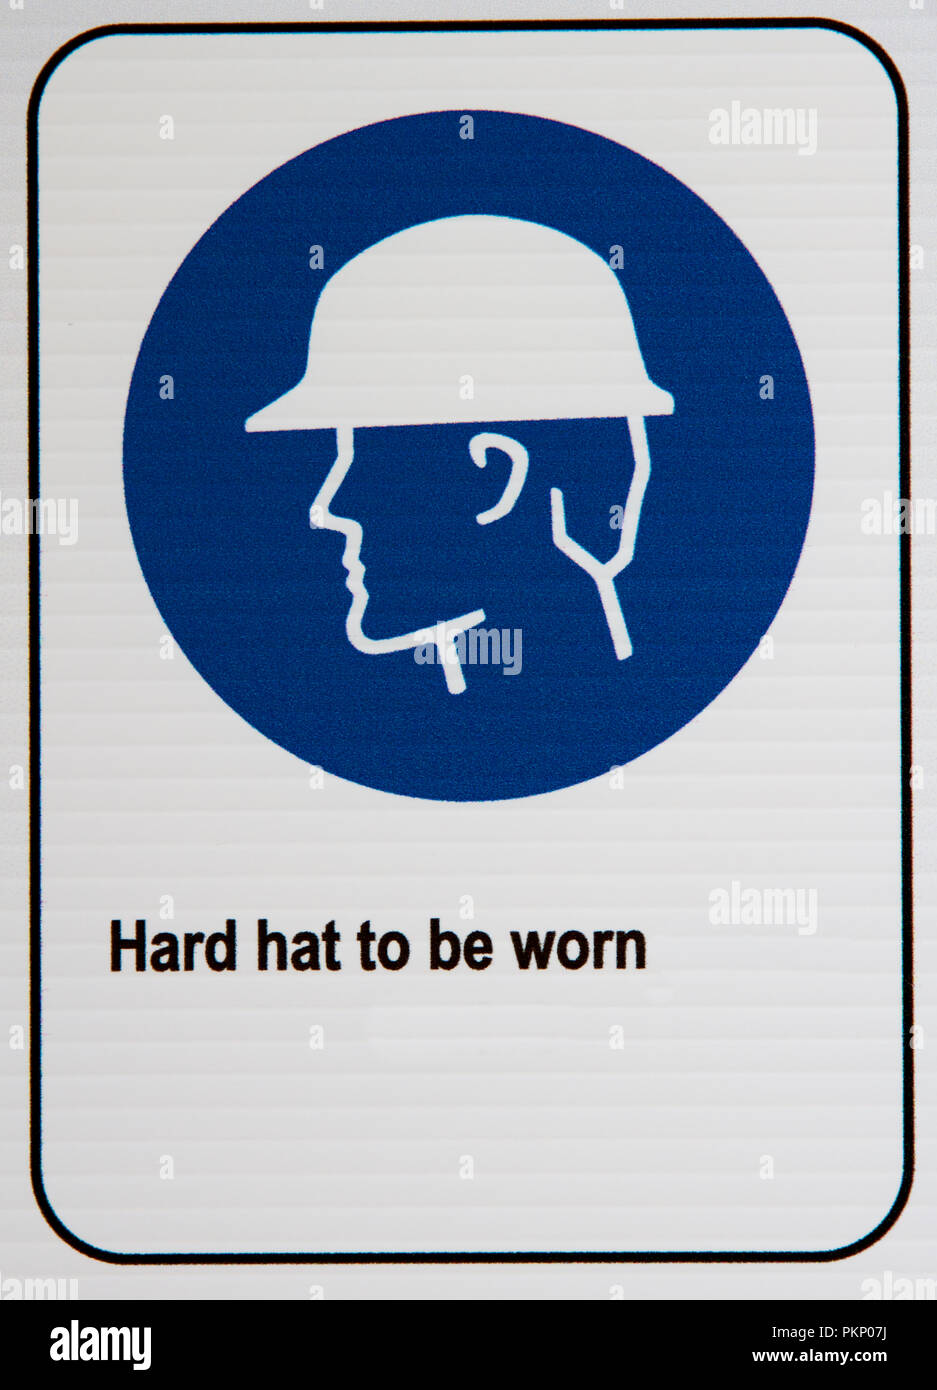 Hard hat must be worn signage at a building site. Stock Photo